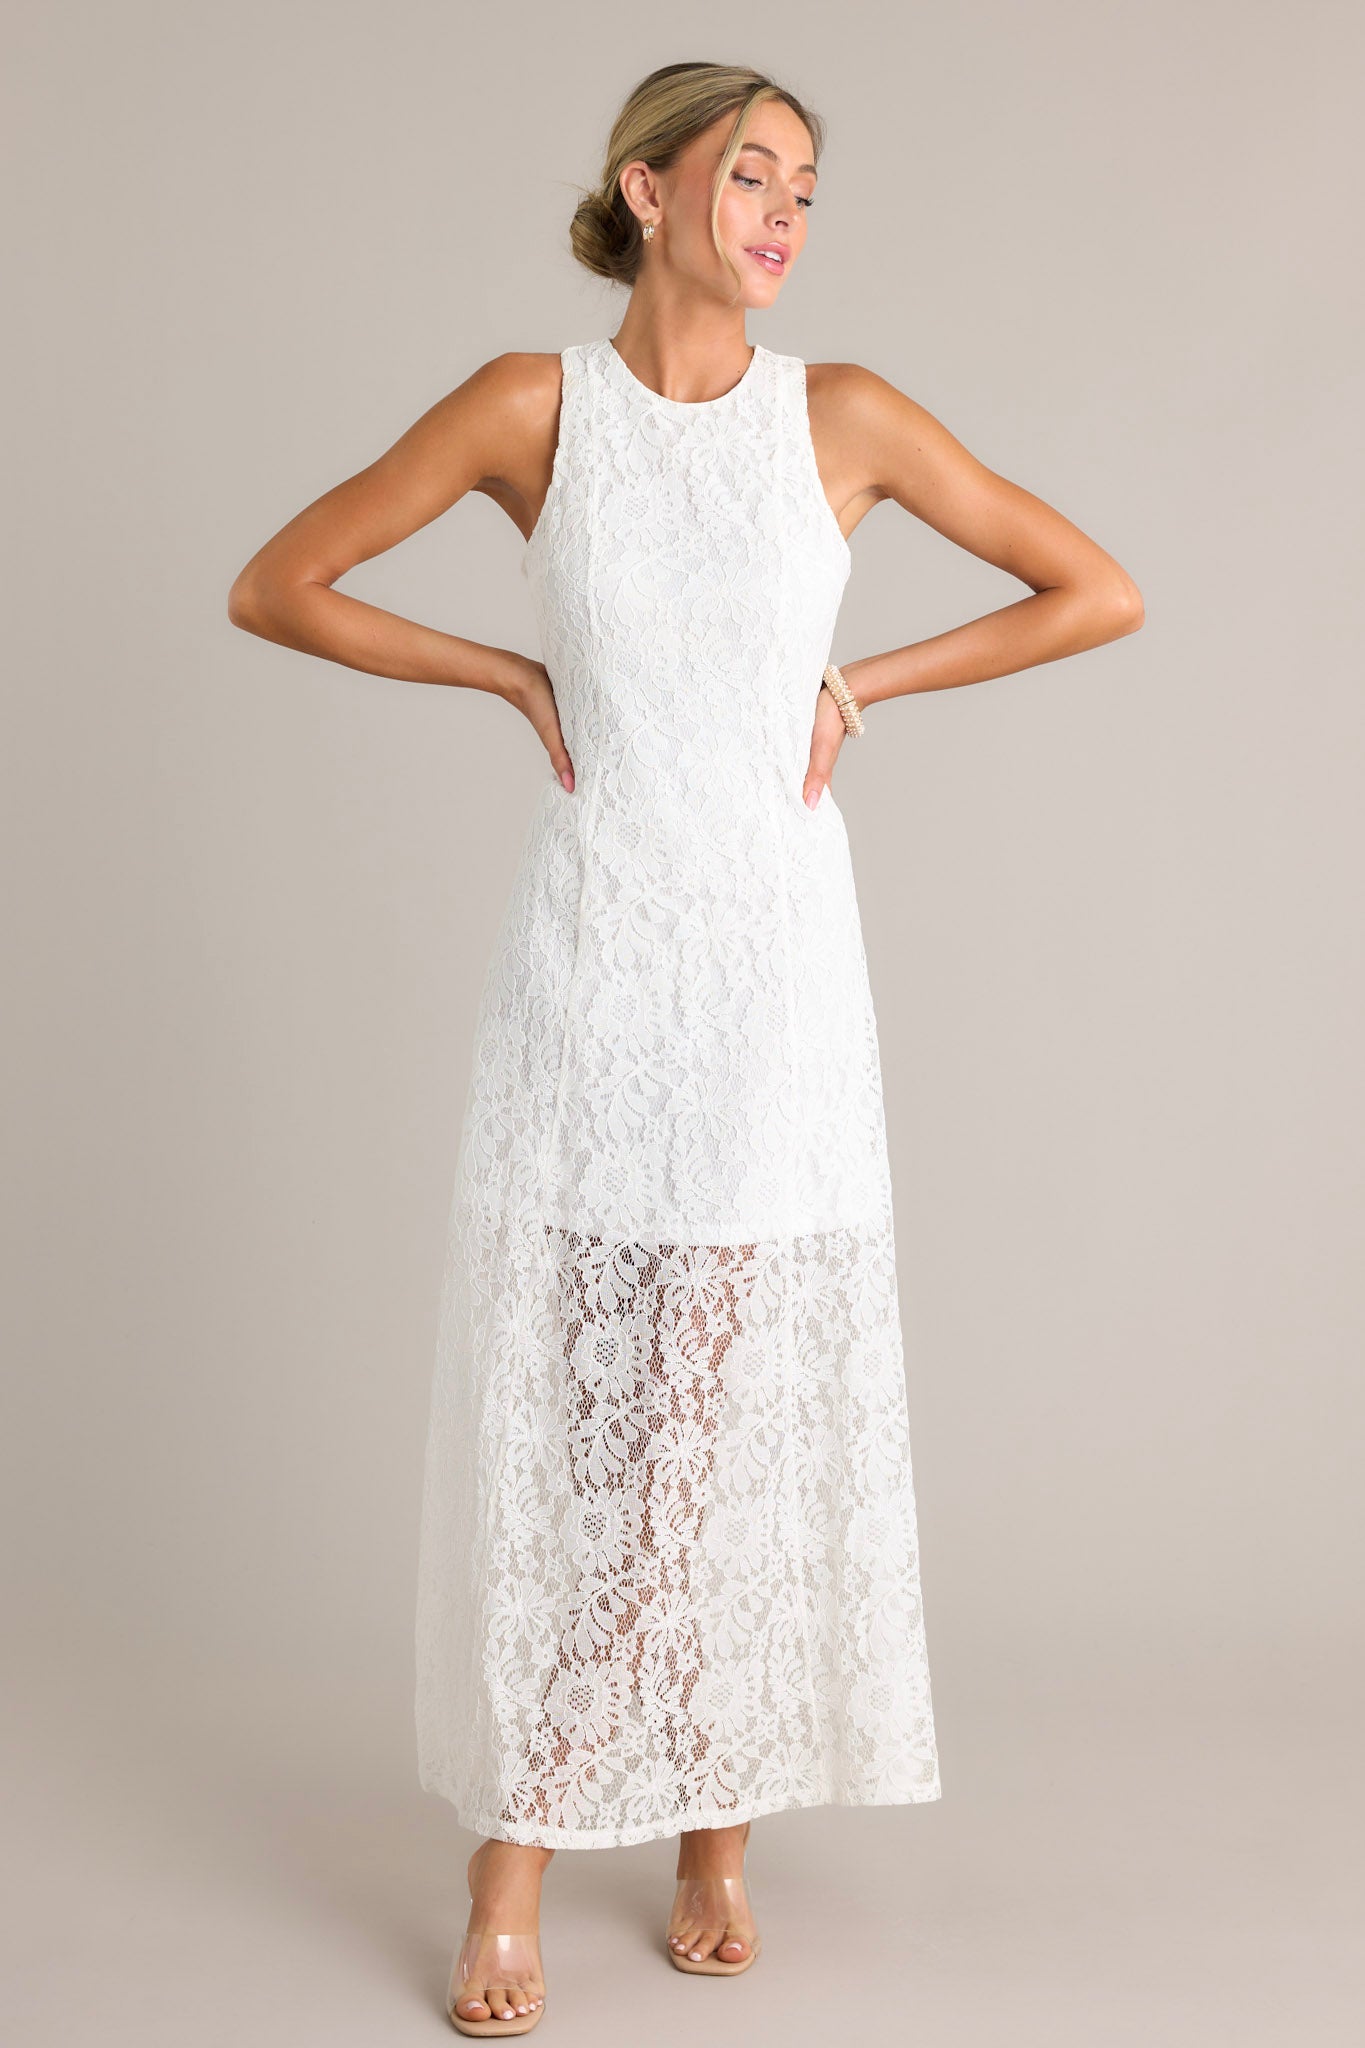 This dress features a high round neckline, a slip up the side, and a lace overlay with a lining that extends from the shoulder to the mid-thigh